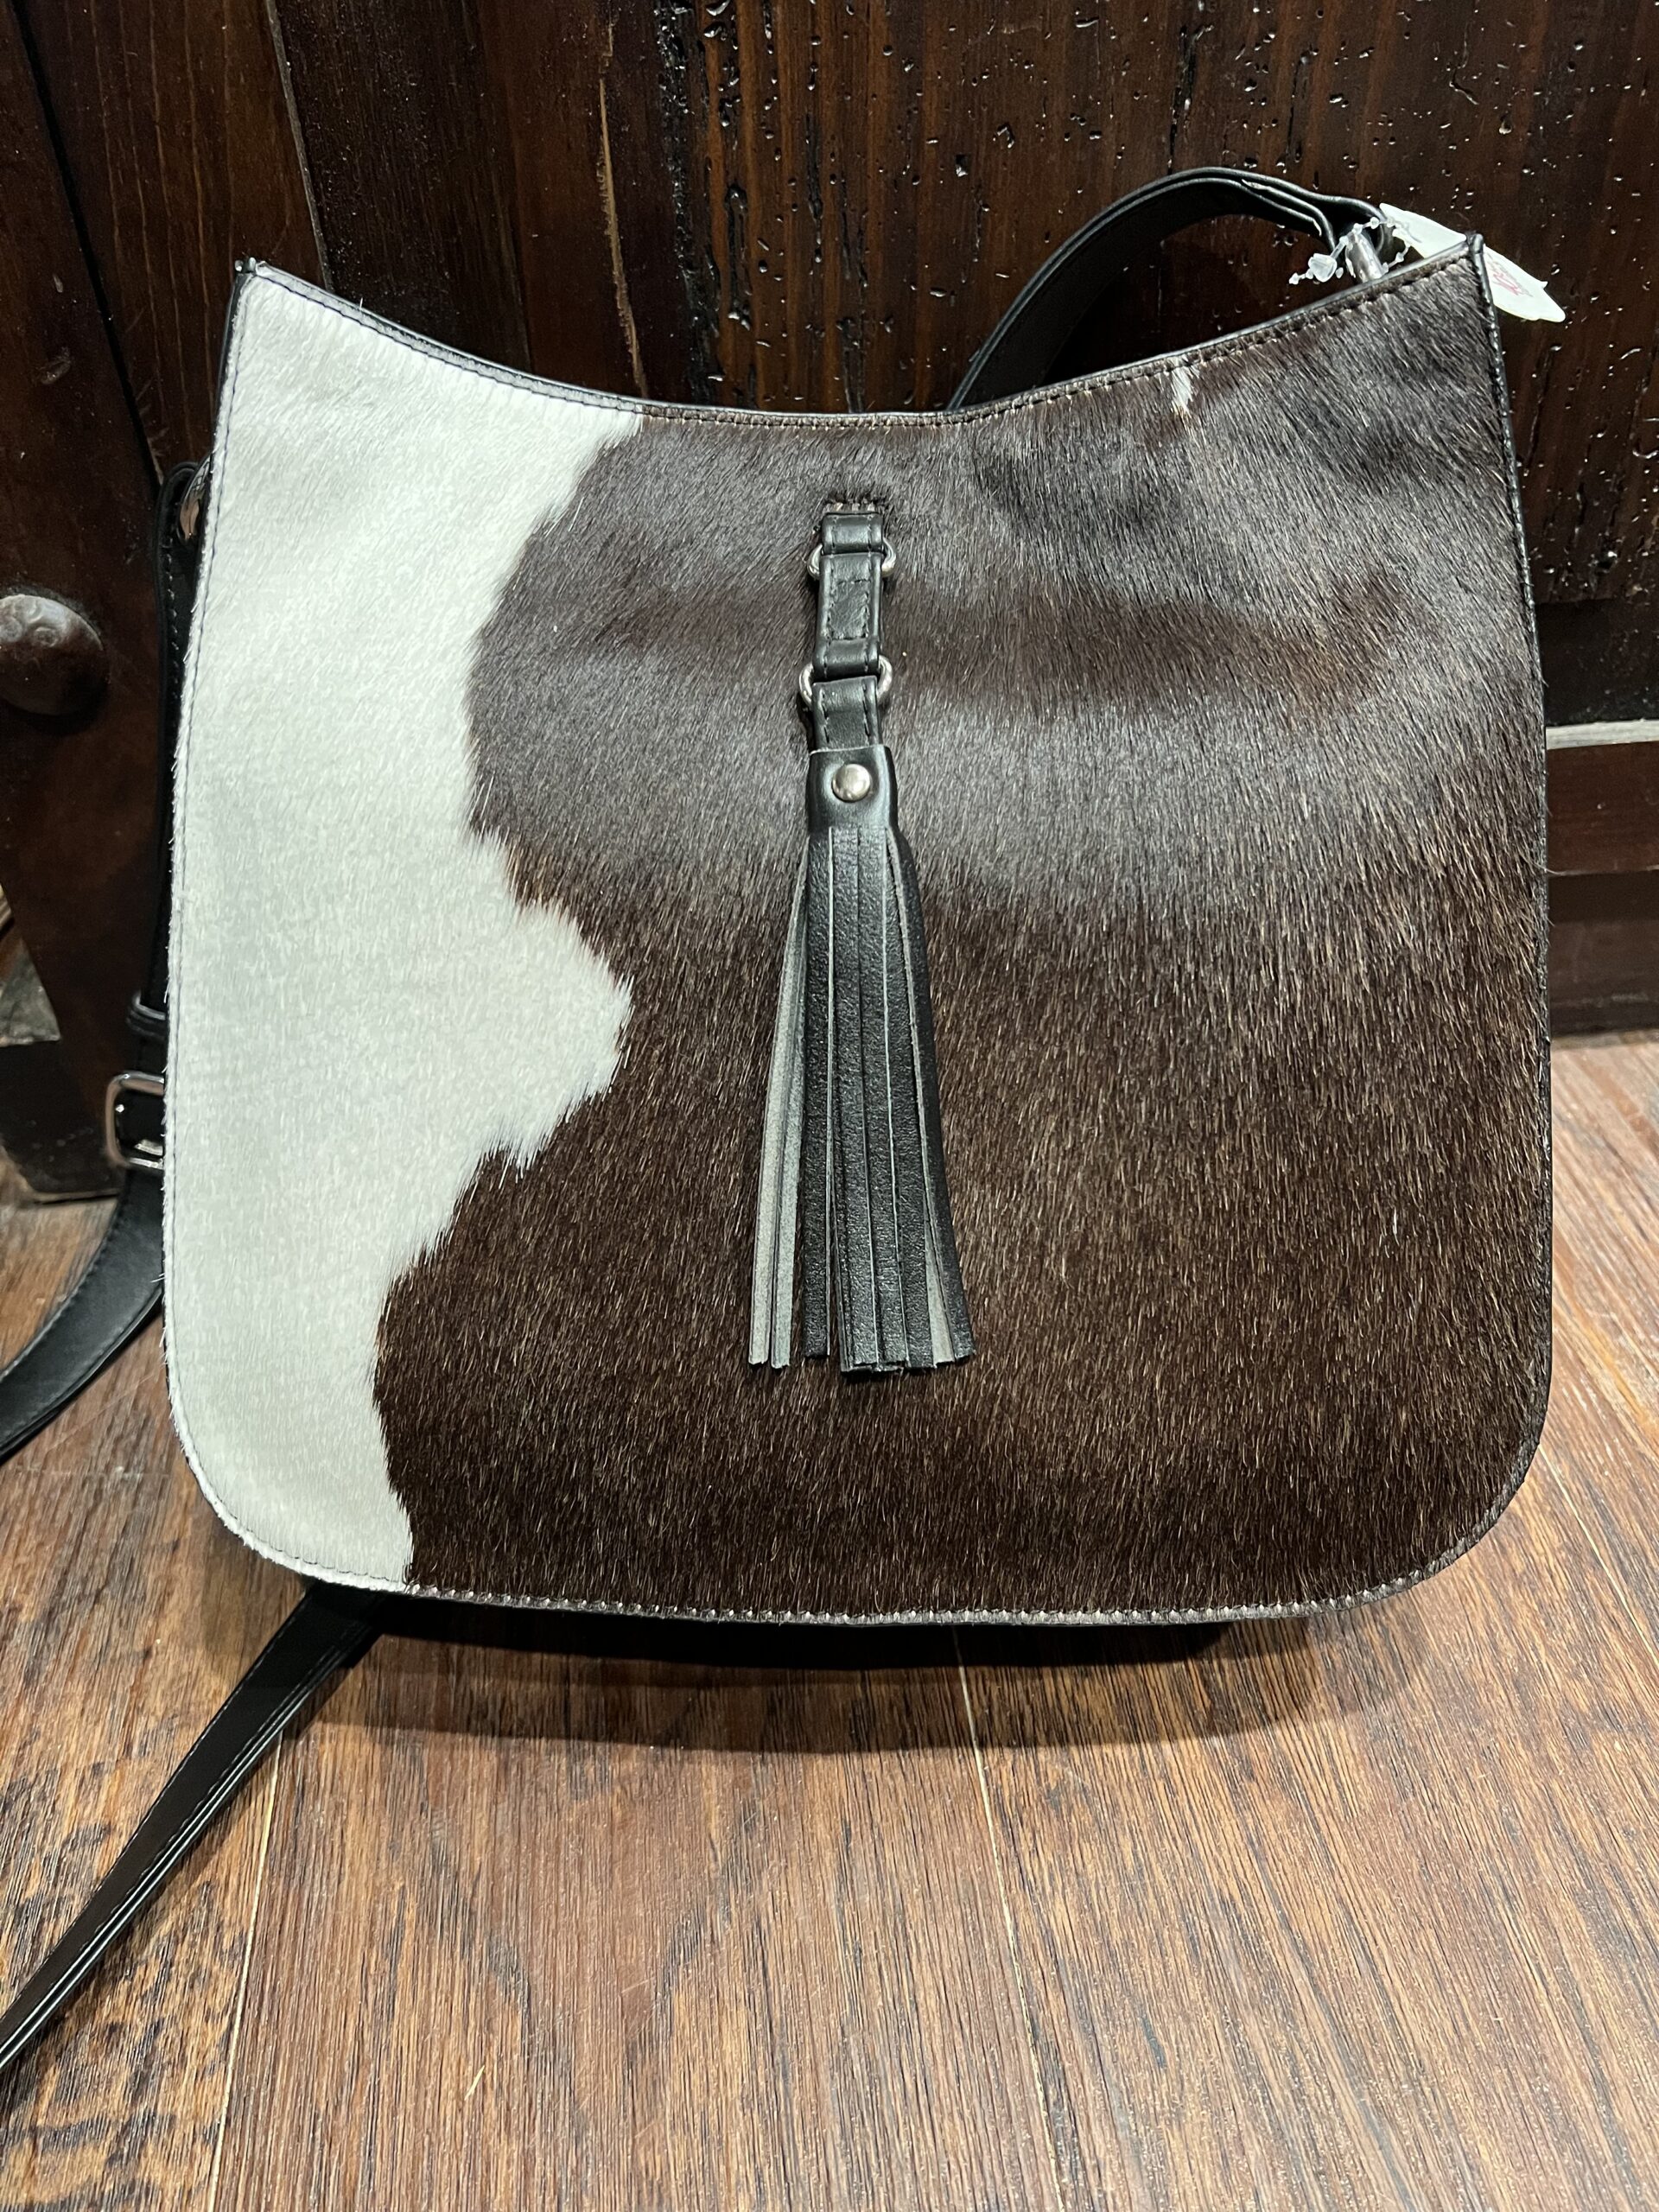 STS Leather Cowhide Fringe Purse - Women's Bags in Cowhide